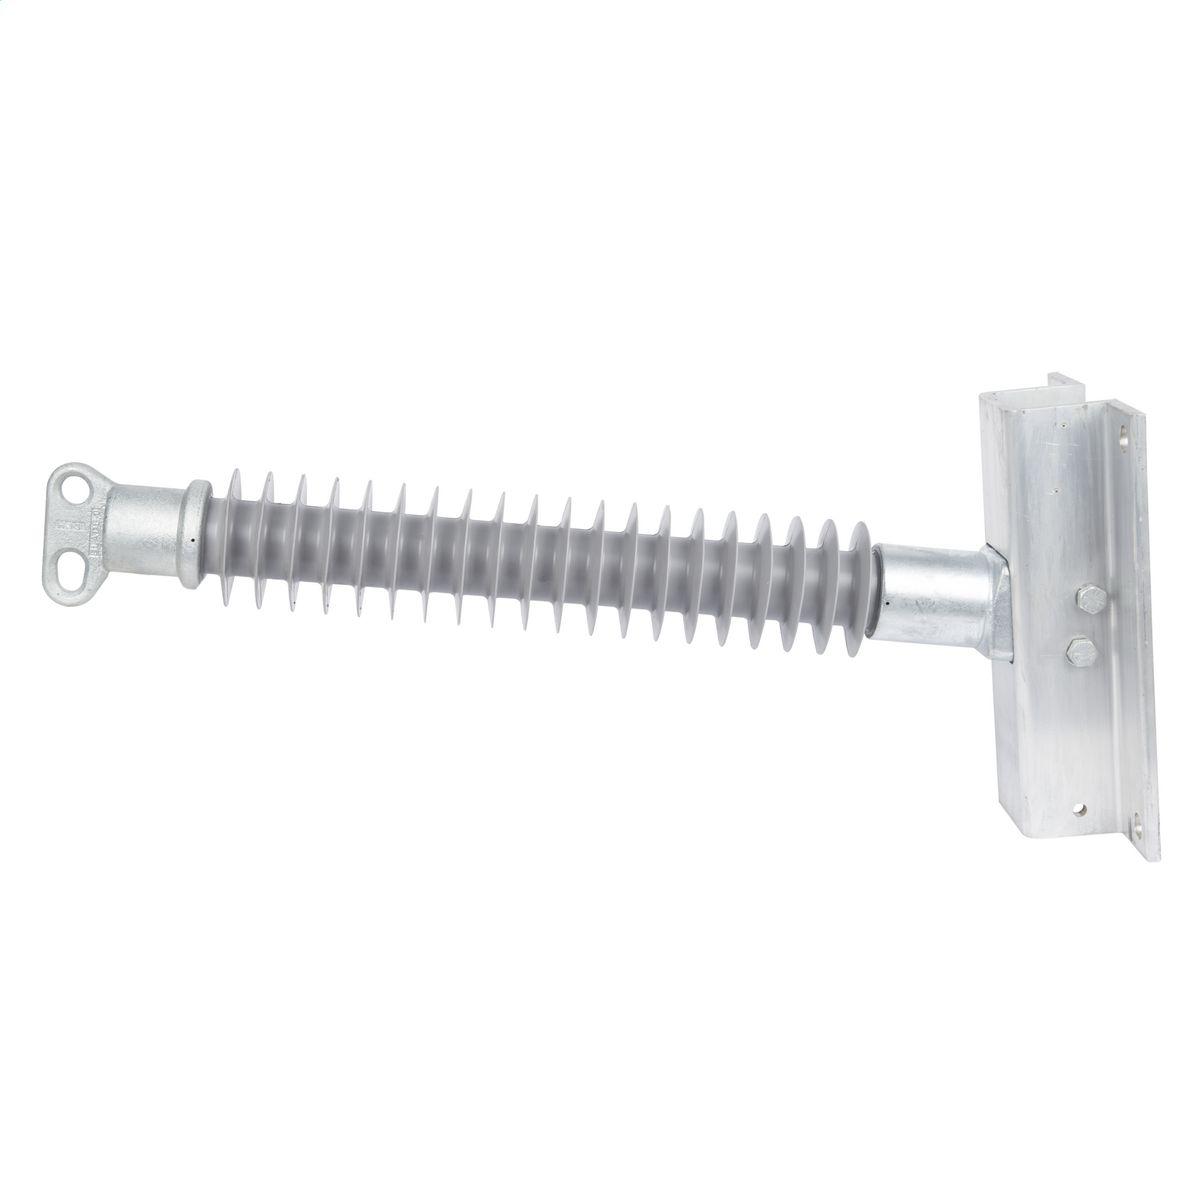 Hubbell P350071S0030 3.5" Line Post, 2 hole blade,Aluminum  flat base 9x13 - 7/8" bolts  ; Made from hydrophobic silicone polymer ; 